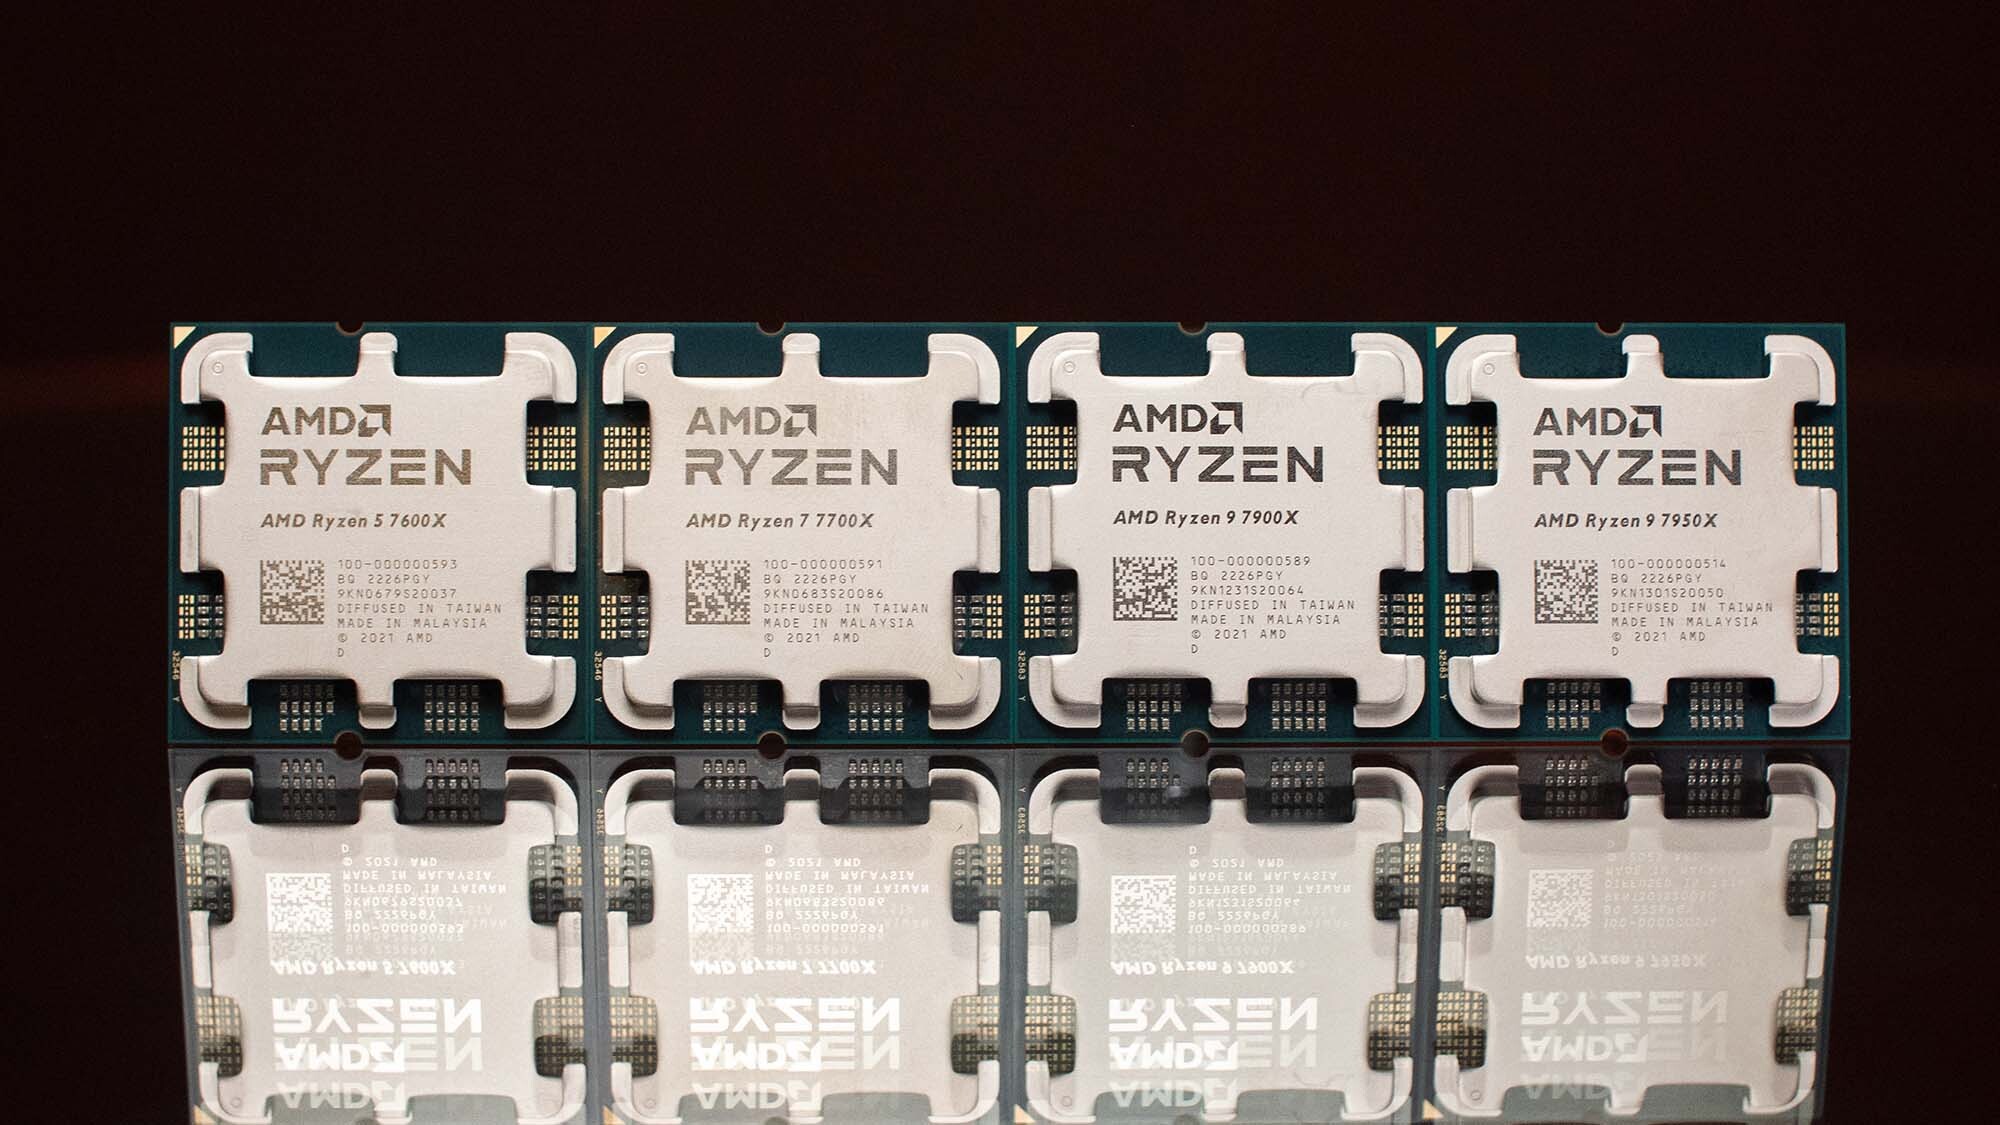 New supercharged AMD Ryzen 7000 CPUs could possibly be imminent